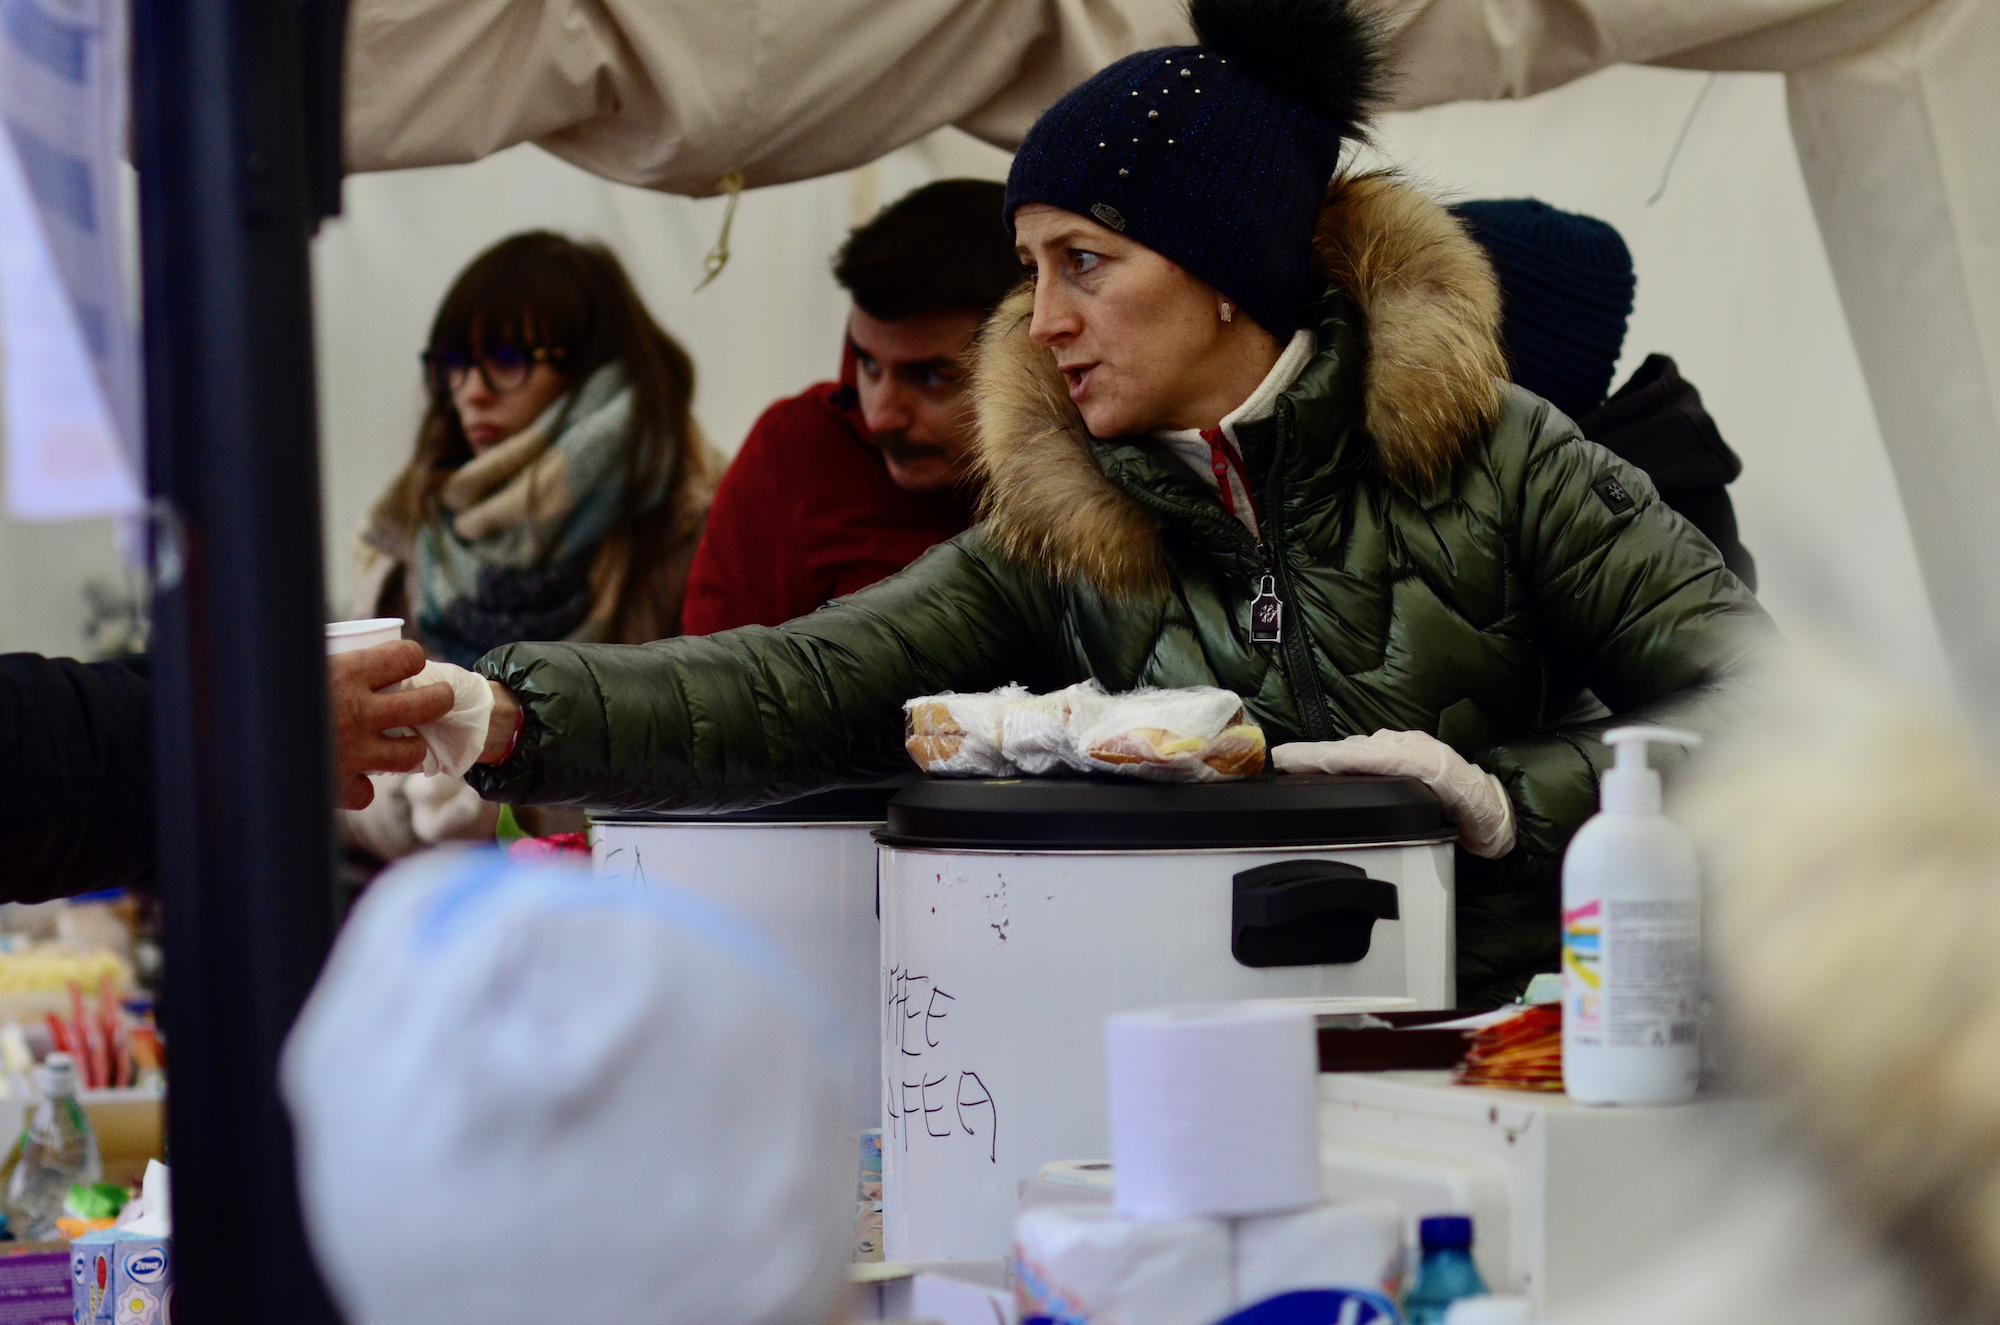 Volunteers offer hot tea and coffee to those arriving at Isaccea